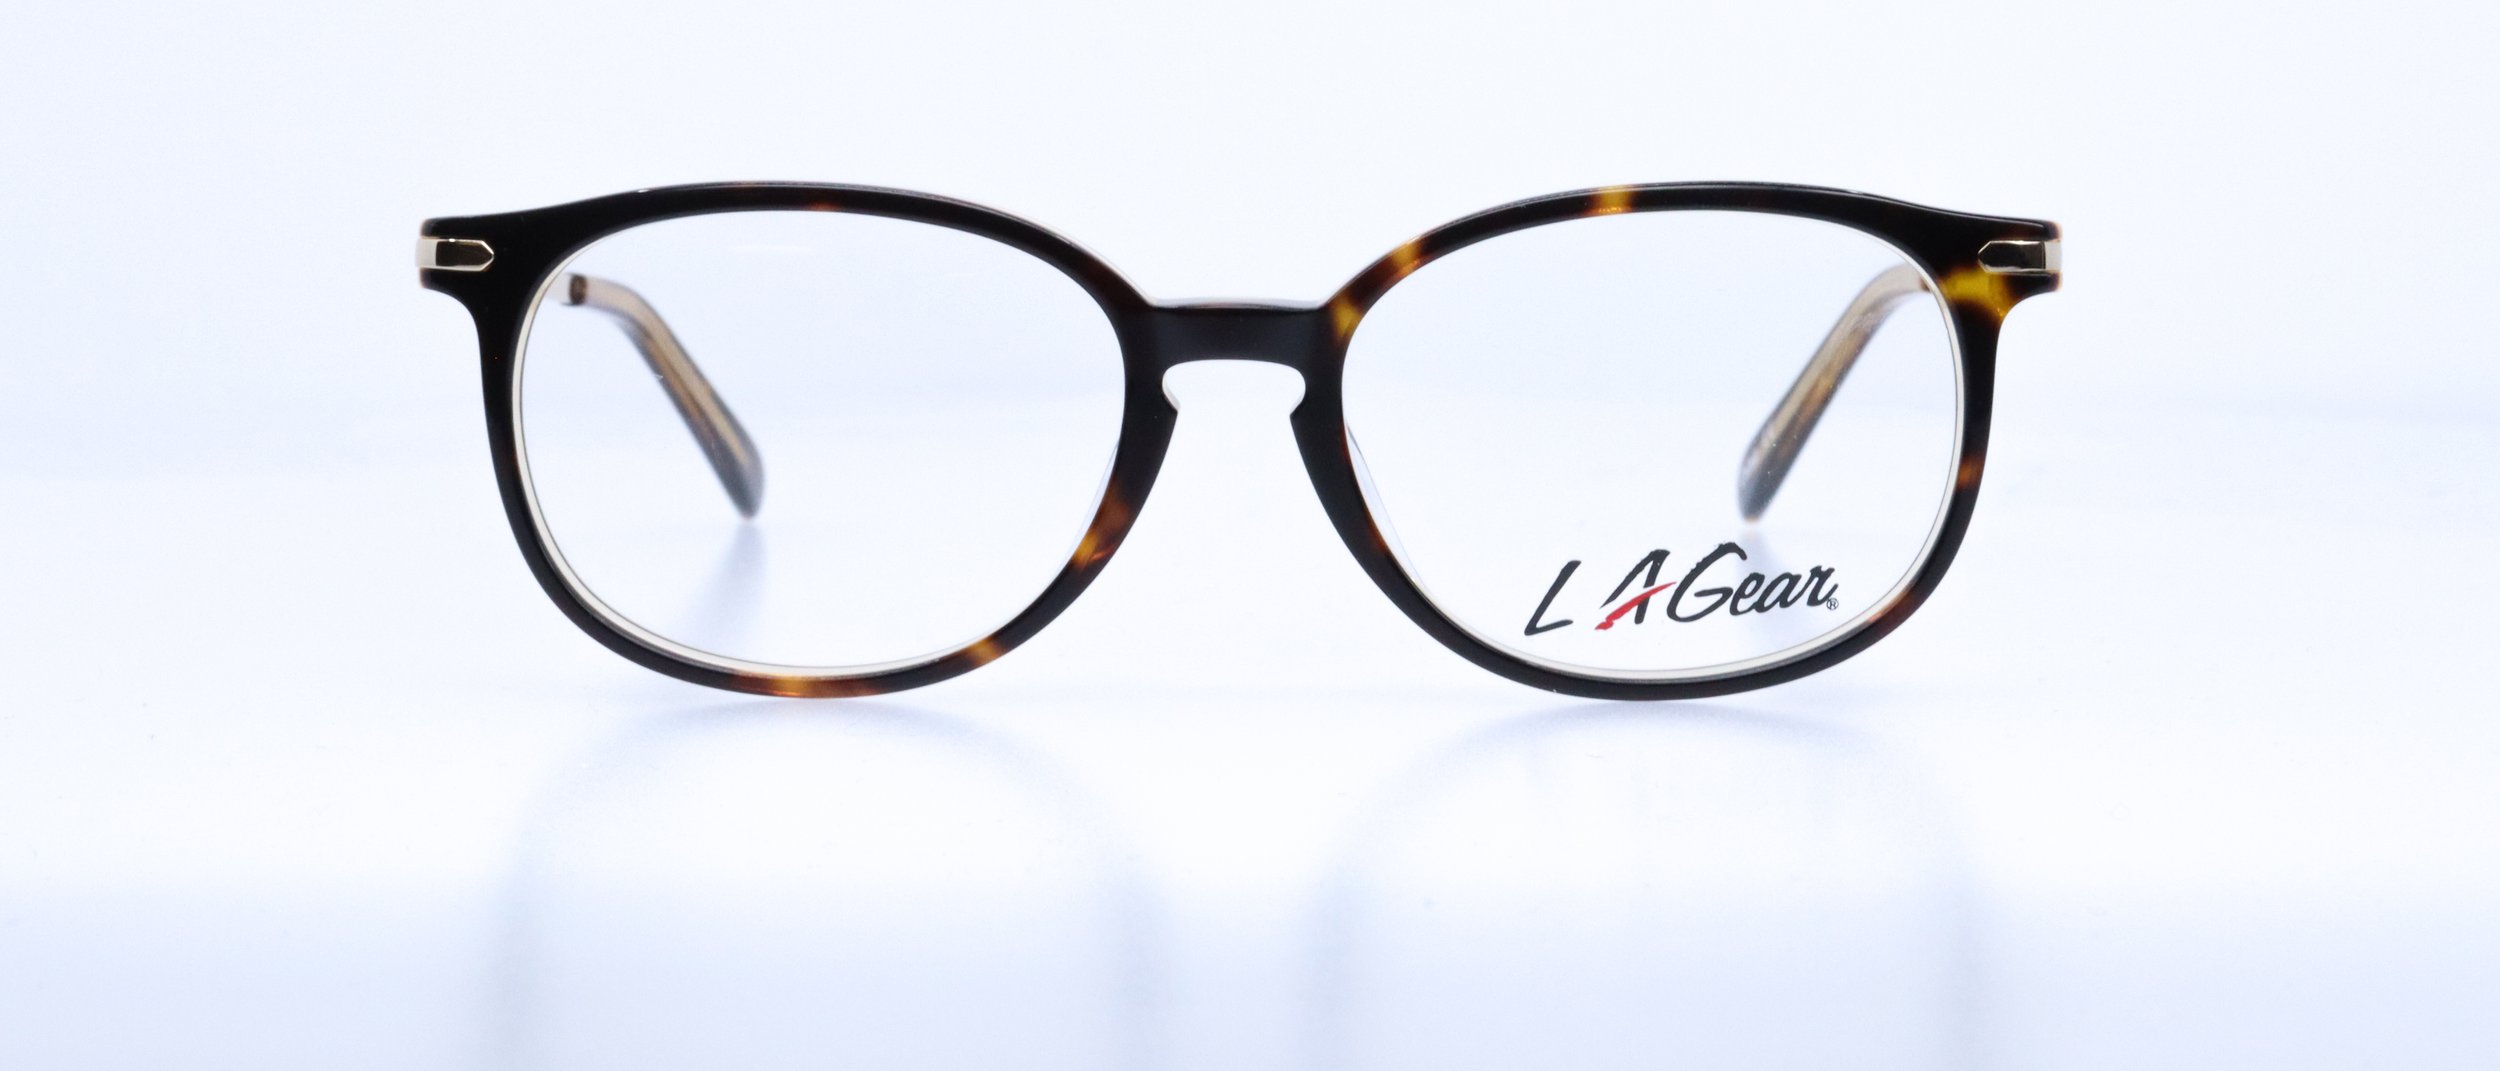  Arcadia: 50-16-135, Available in Blue/Tortoise or Tortoise/Tan 